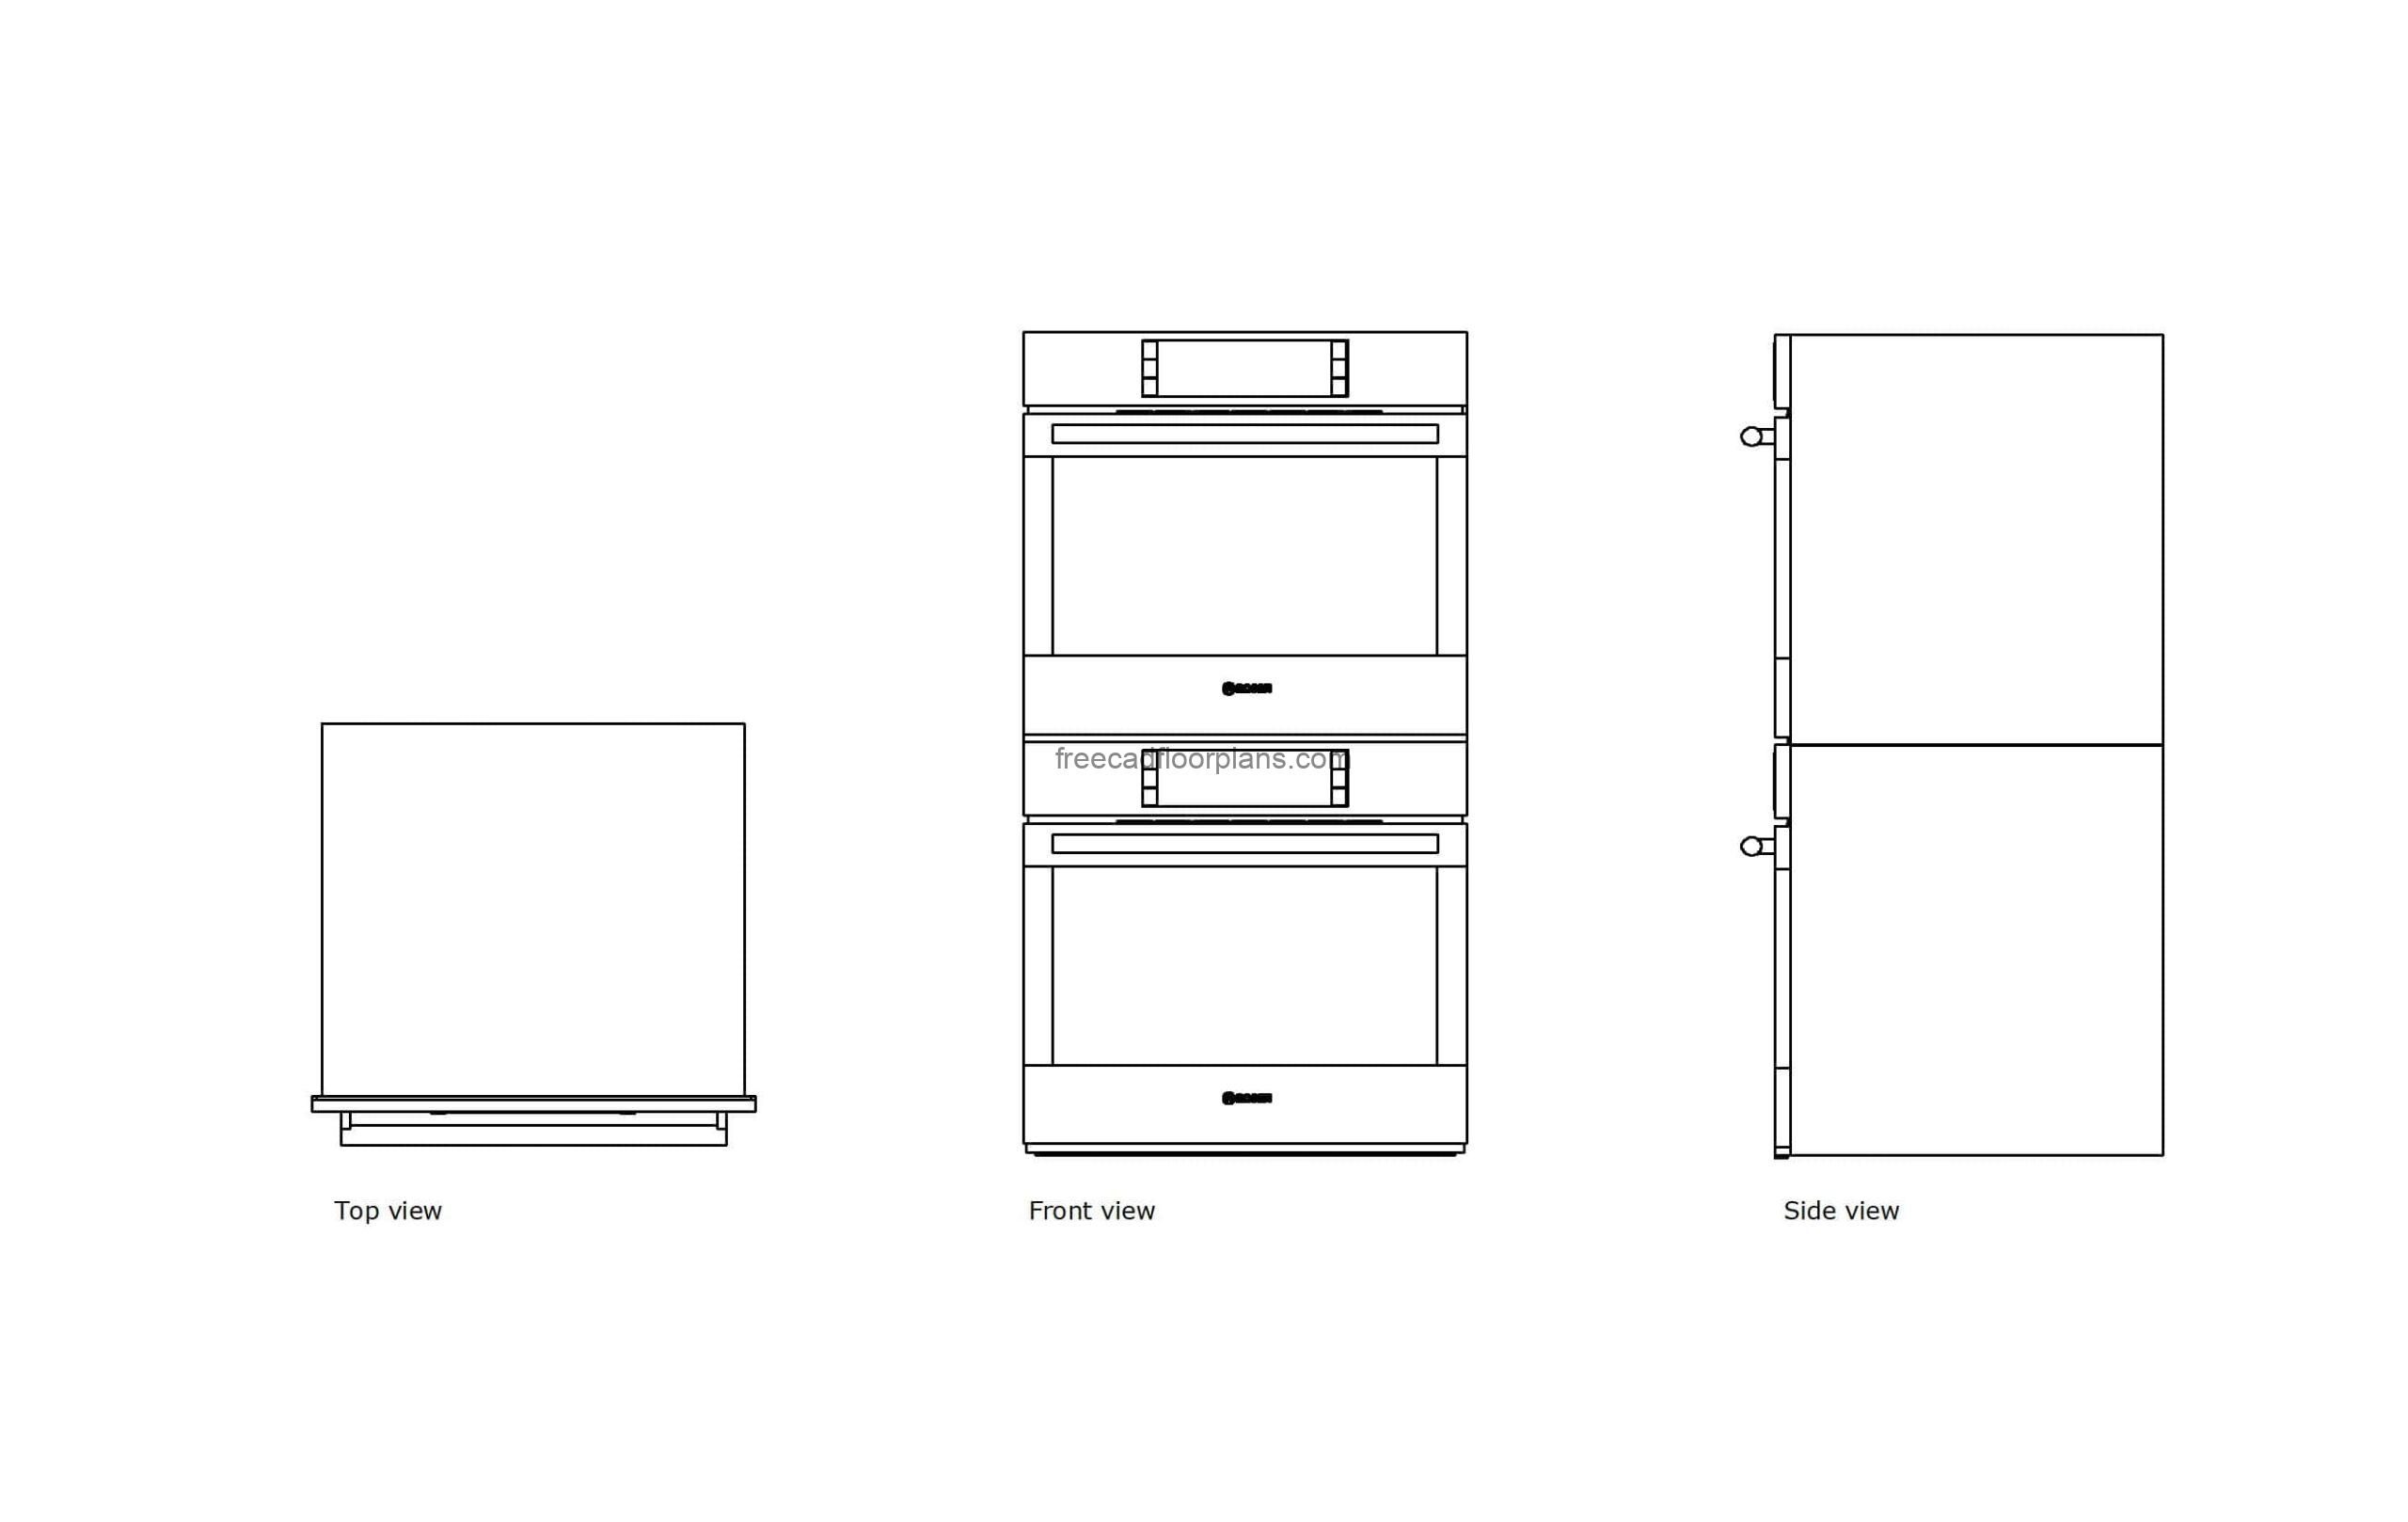 autocad drawing of a bosch 800 serie oven, 2d plan and elevation views, dwg file free for download